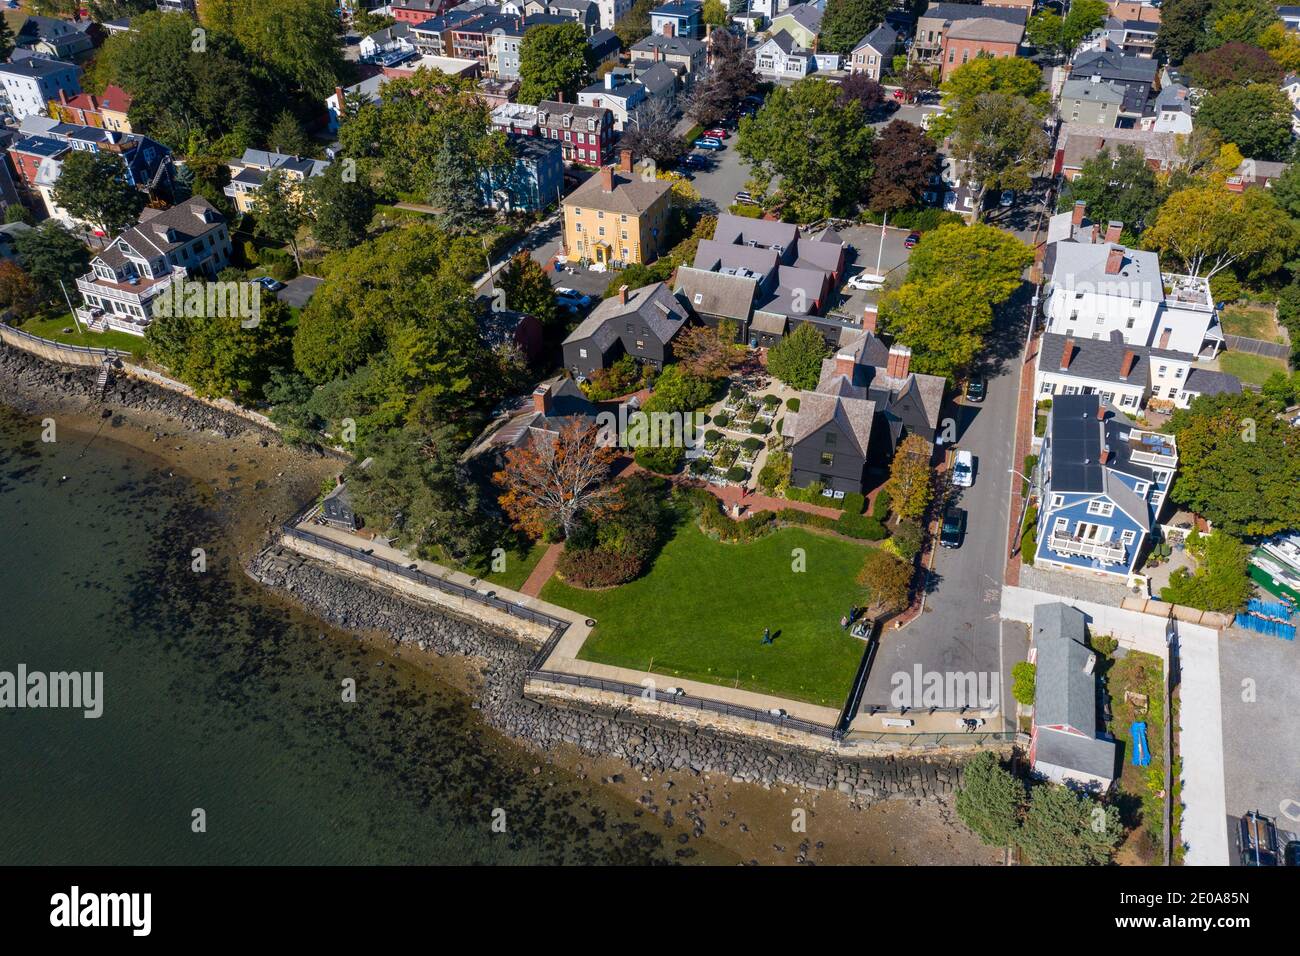 The House of the Seven Gables, Salem, MA, USA Stock Photo